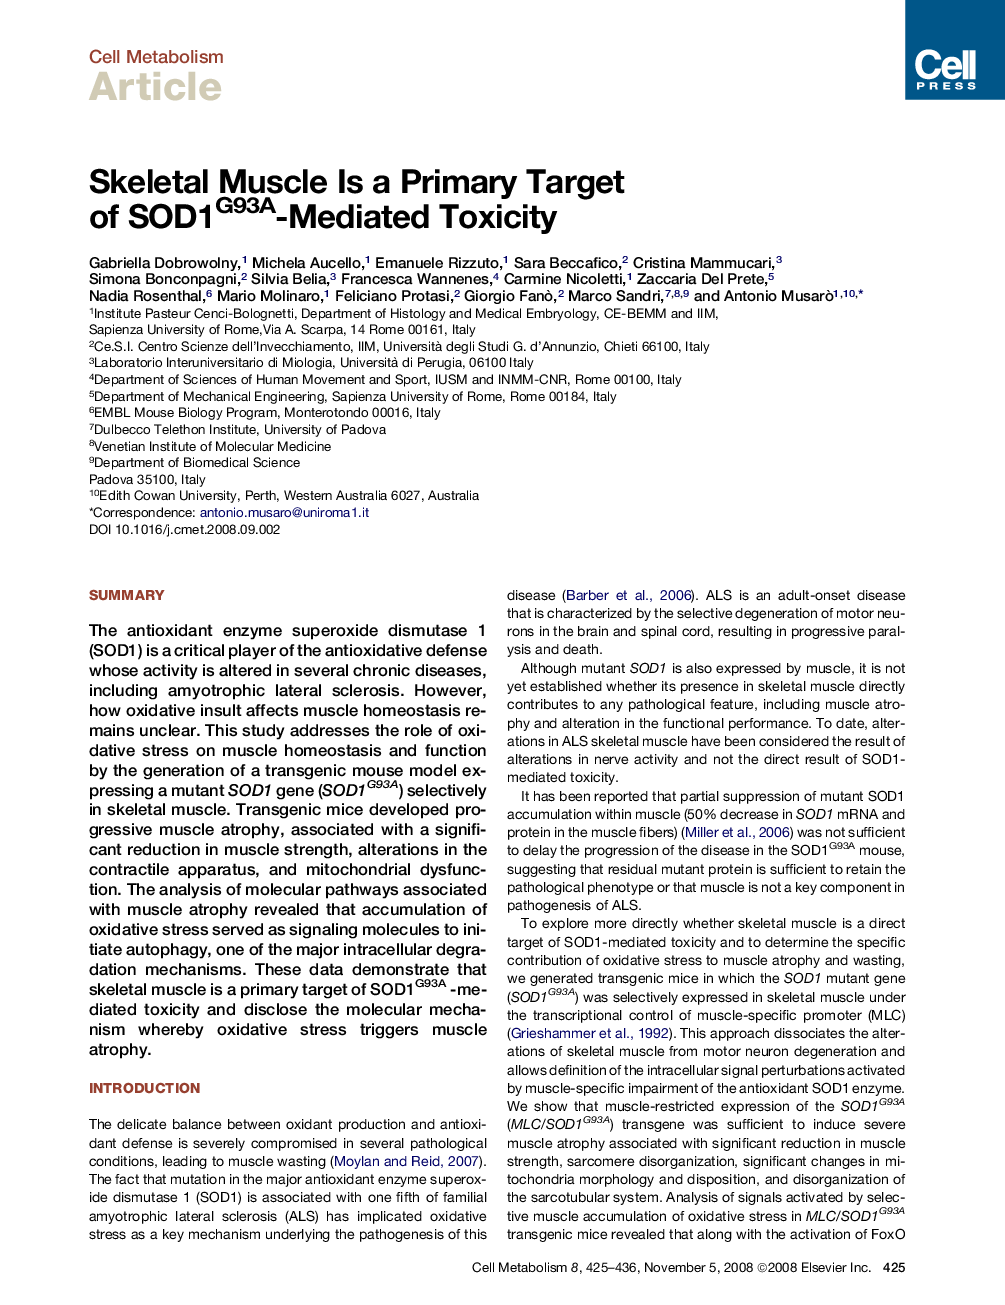 Skeletal Muscle Is a Primary Target of SOD1G93A-Mediated Toxicity